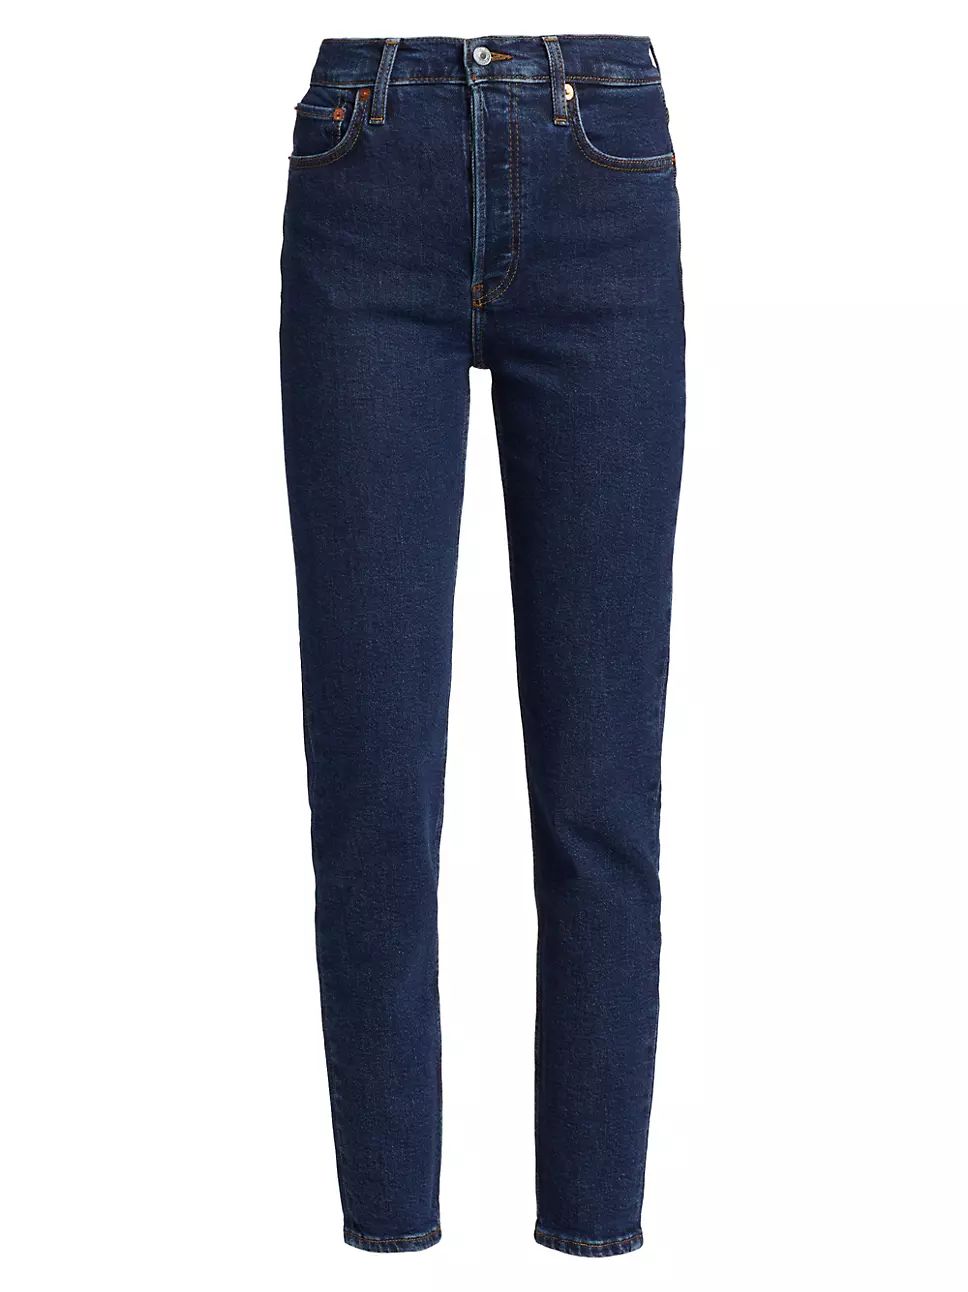 High-Rise Skinny Jeans | Saks Fifth Avenue